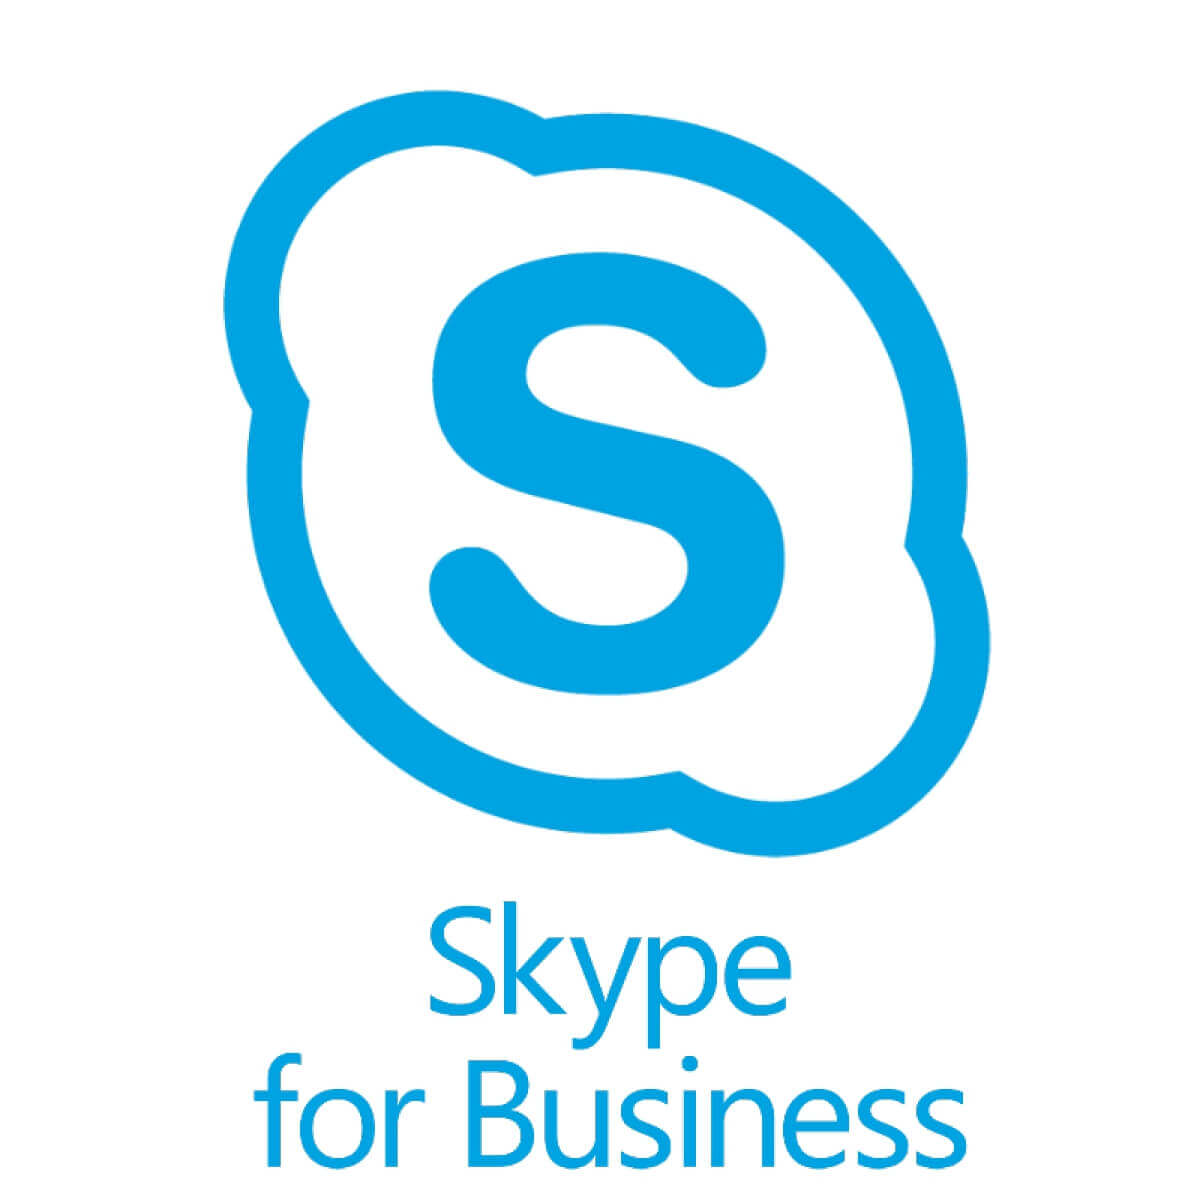 incorrect name appearing in skype for business